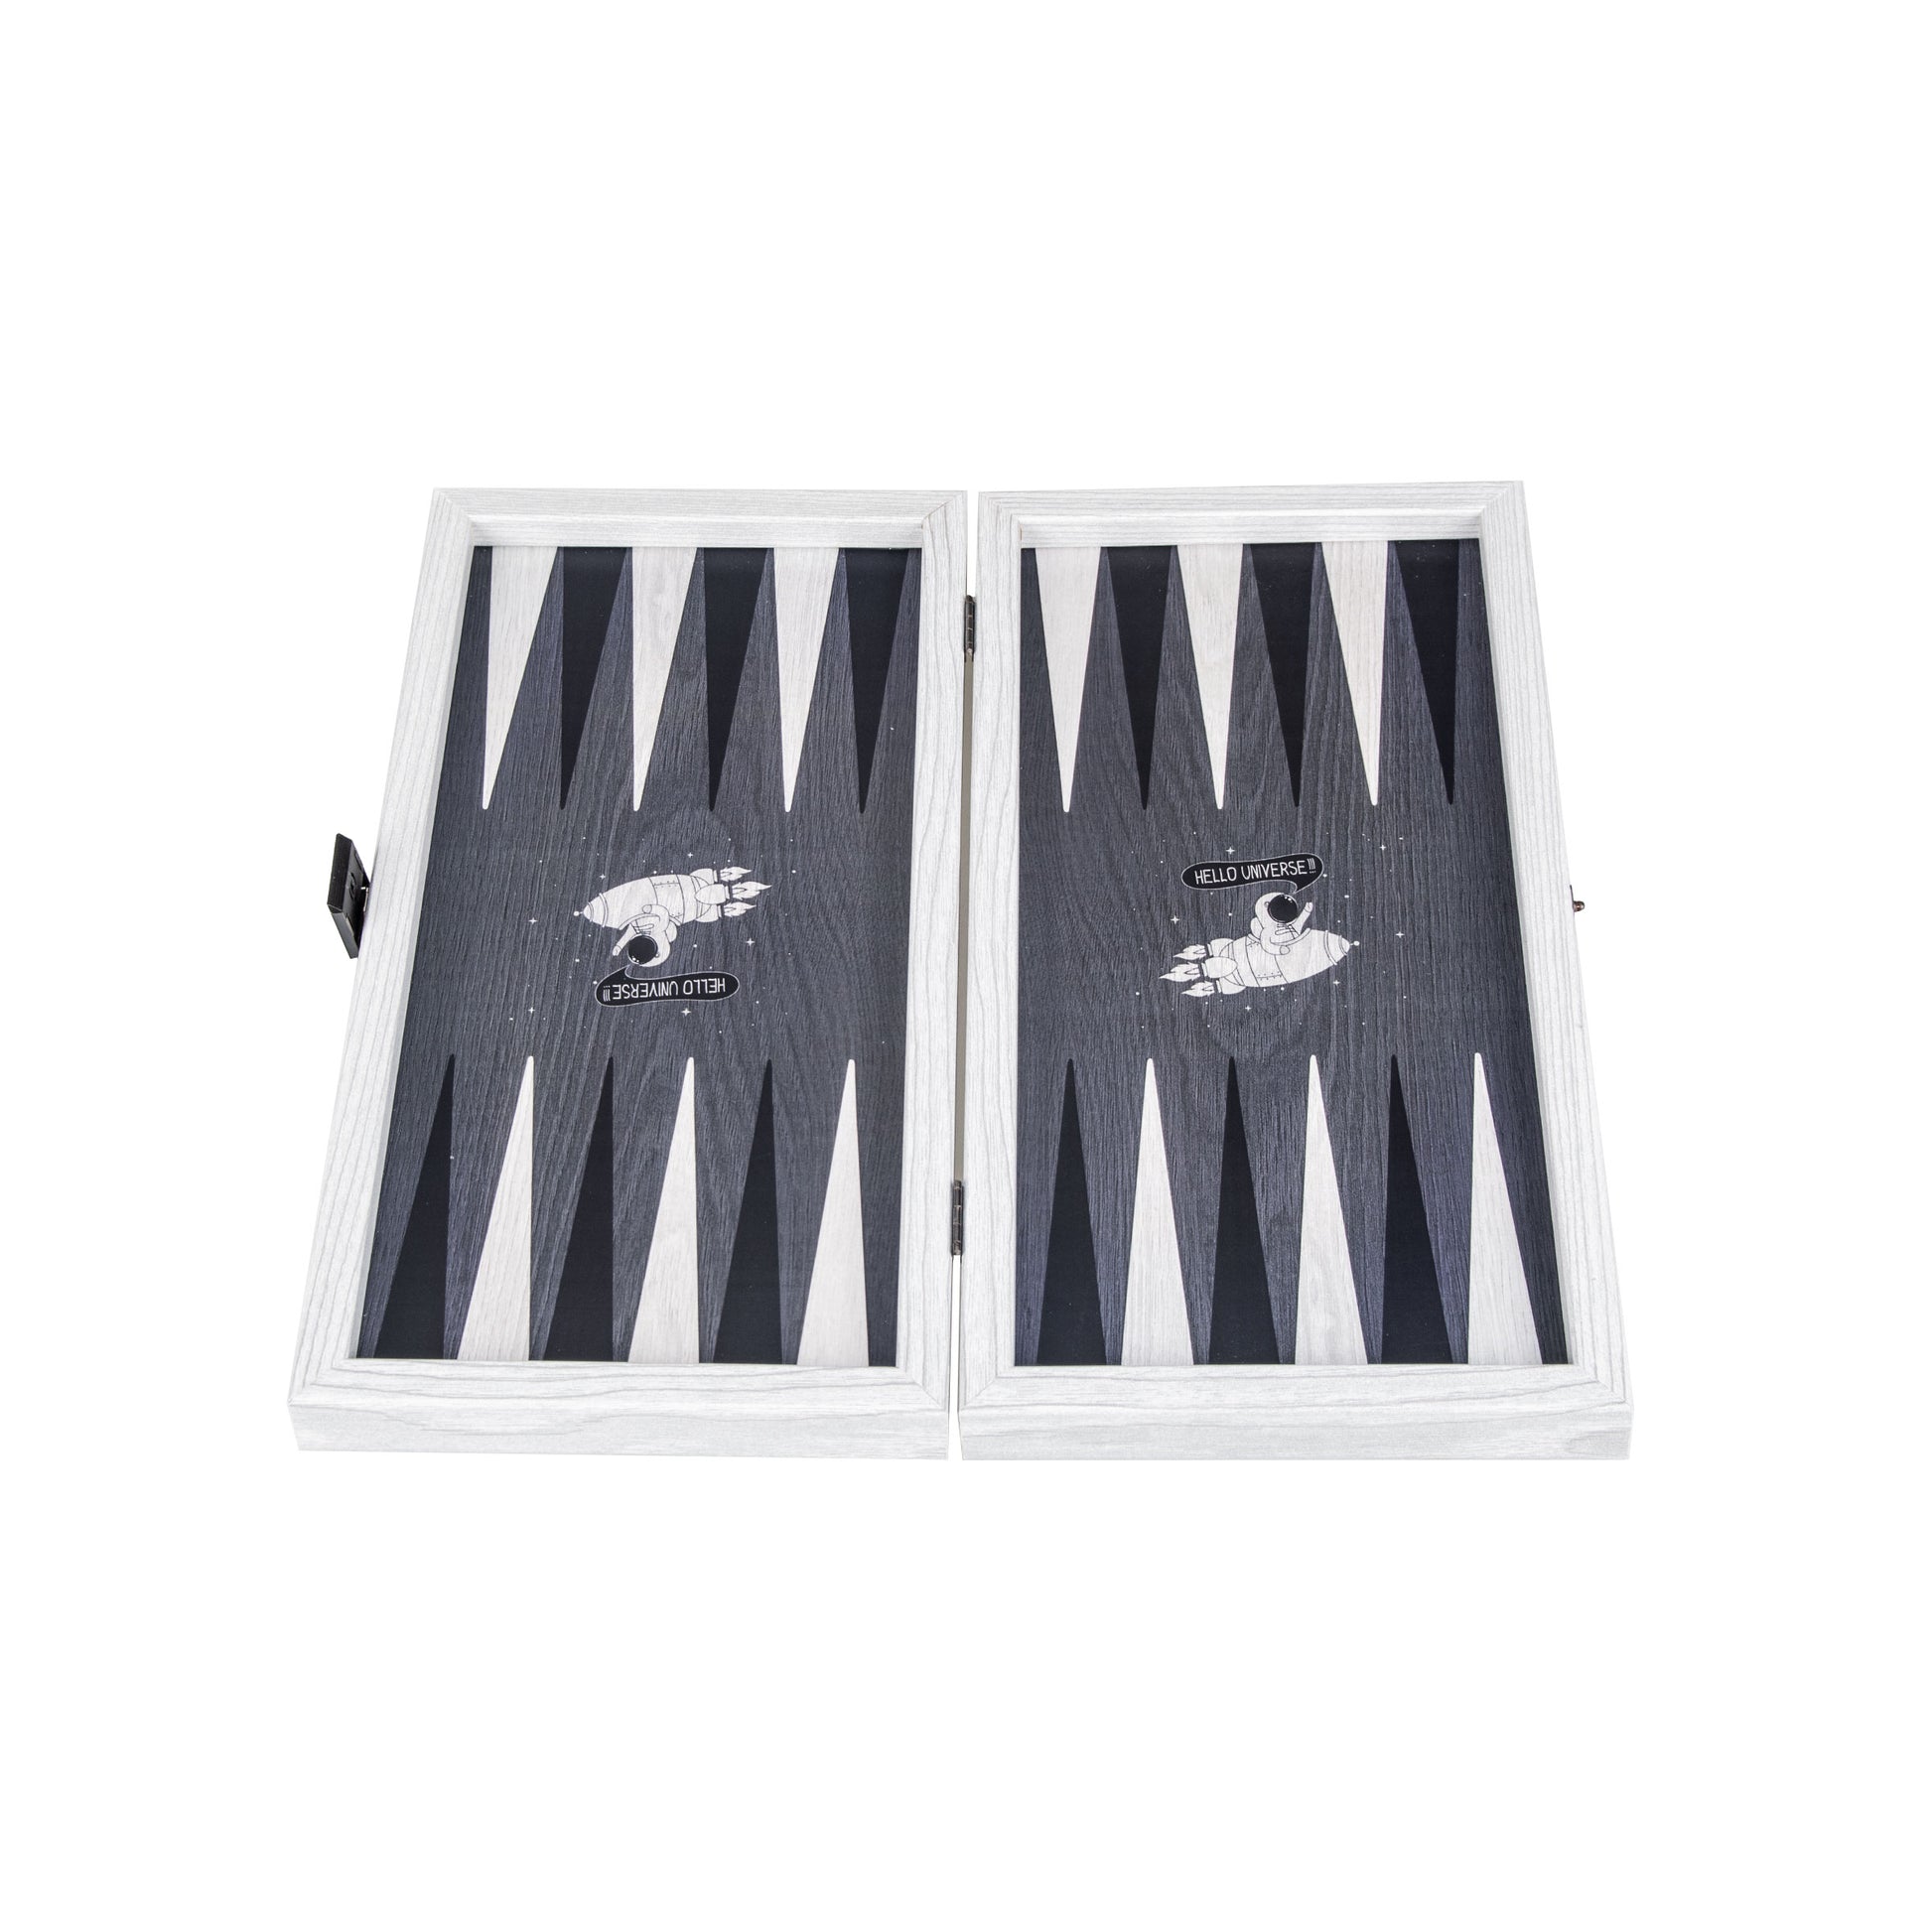 Hello Universe Travel Size Backgammon Set - Portable and Stellar Design - Premium Backgammon from MANOPOULOS Chess & Backgammon - Just €29! Shop now at MANOPOULOS Chess & Backgammon